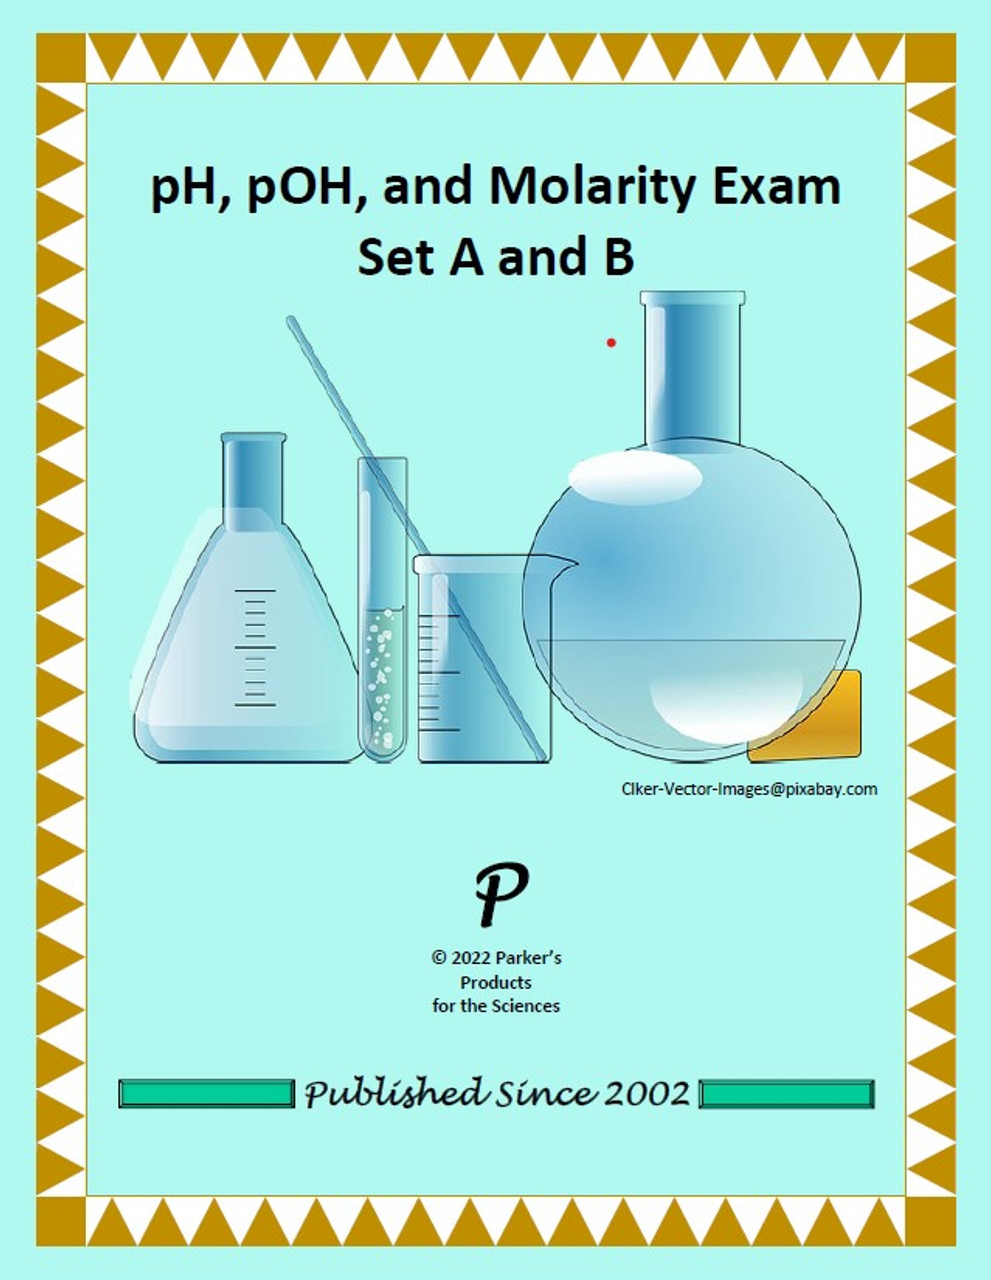 pH, pOH, and Molarity Exam Set A and B